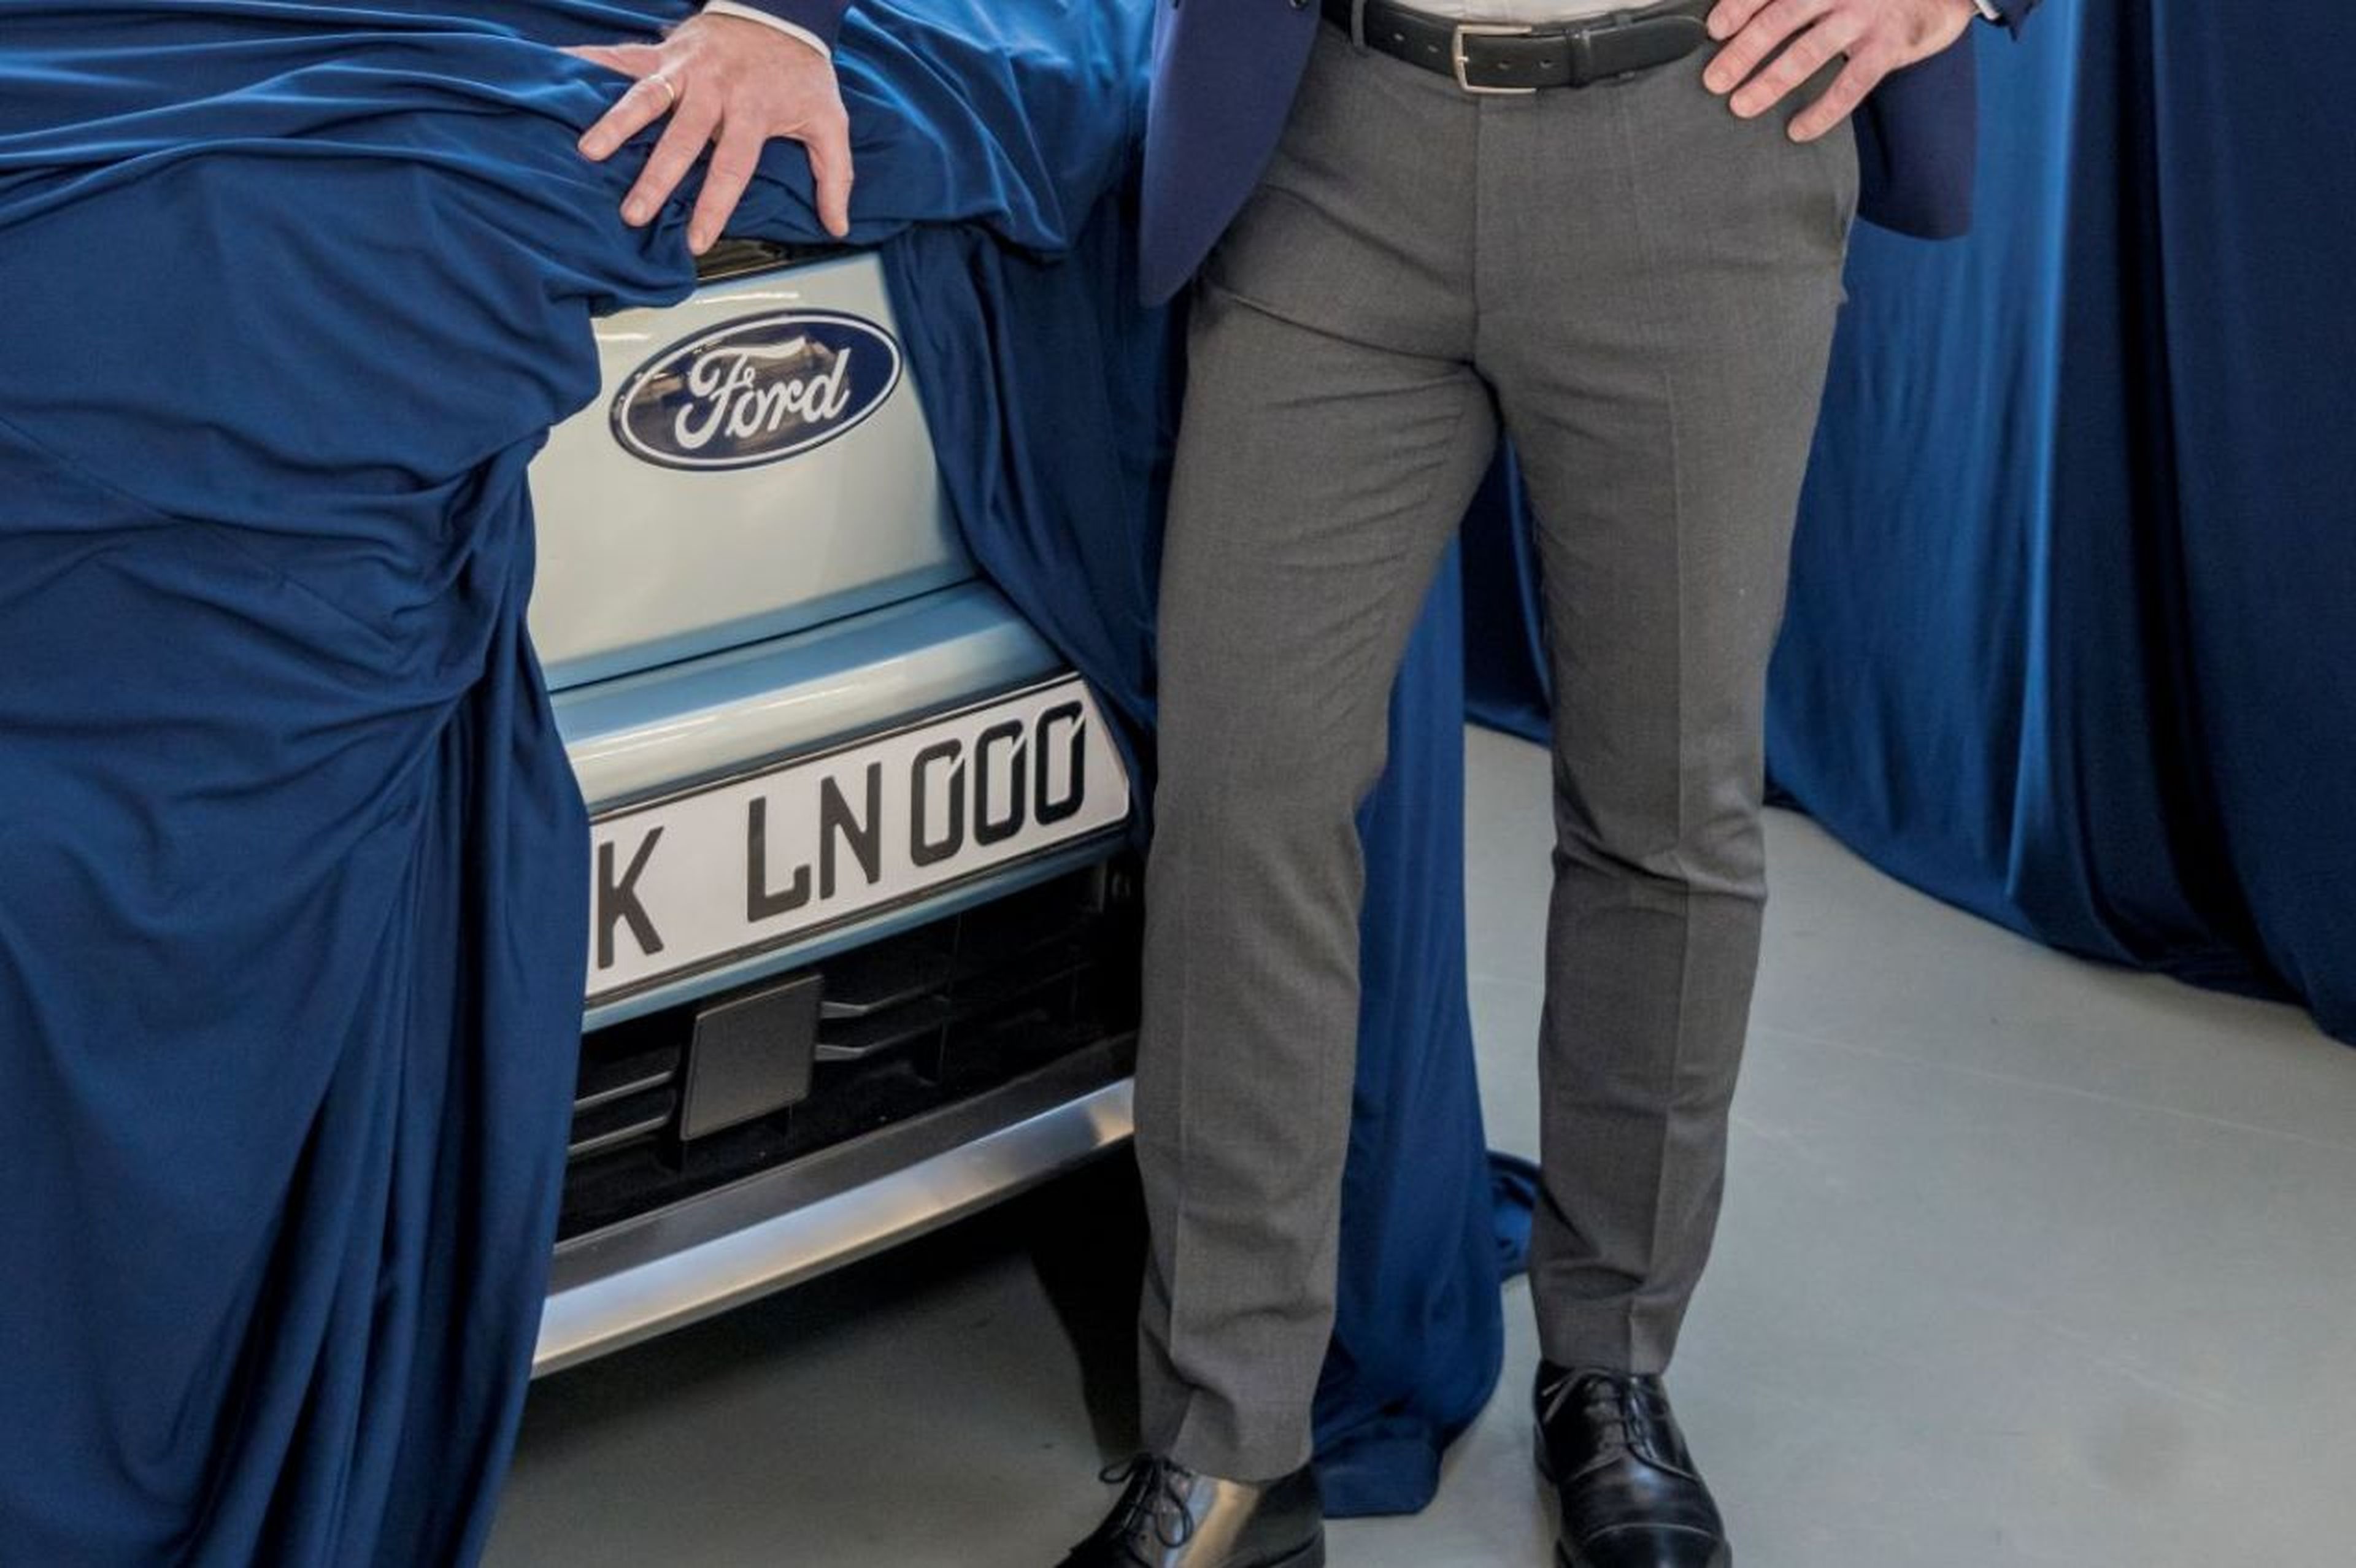 teaser suv electrico ford